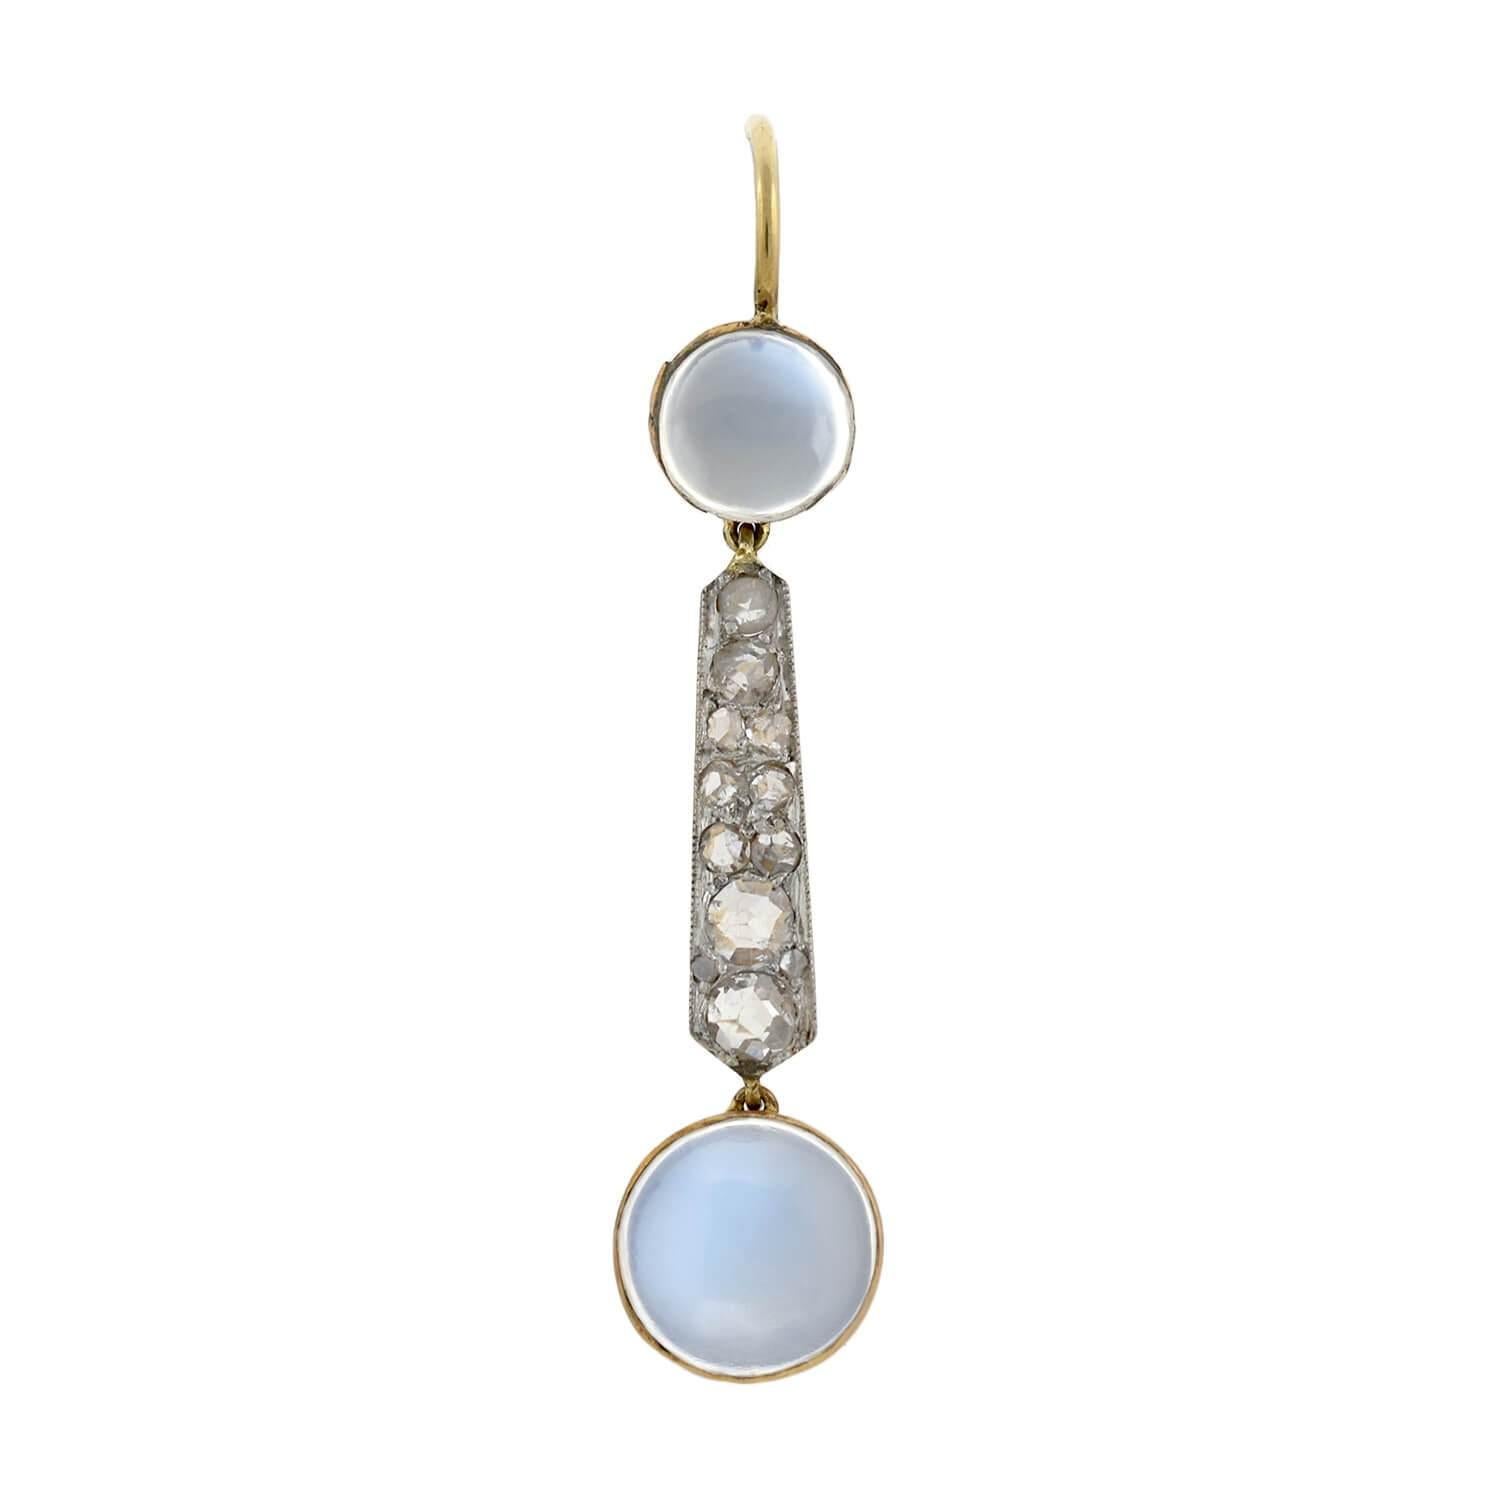 A gorgeous pair of moonstone earrings from the Edwardian (ca1910) era! These stunning earrings are crafted in platinum topped 14kt yellow gold, and have a dramatic elongated drop design. A round, bezel set moonstone cabochon rests at the top, and